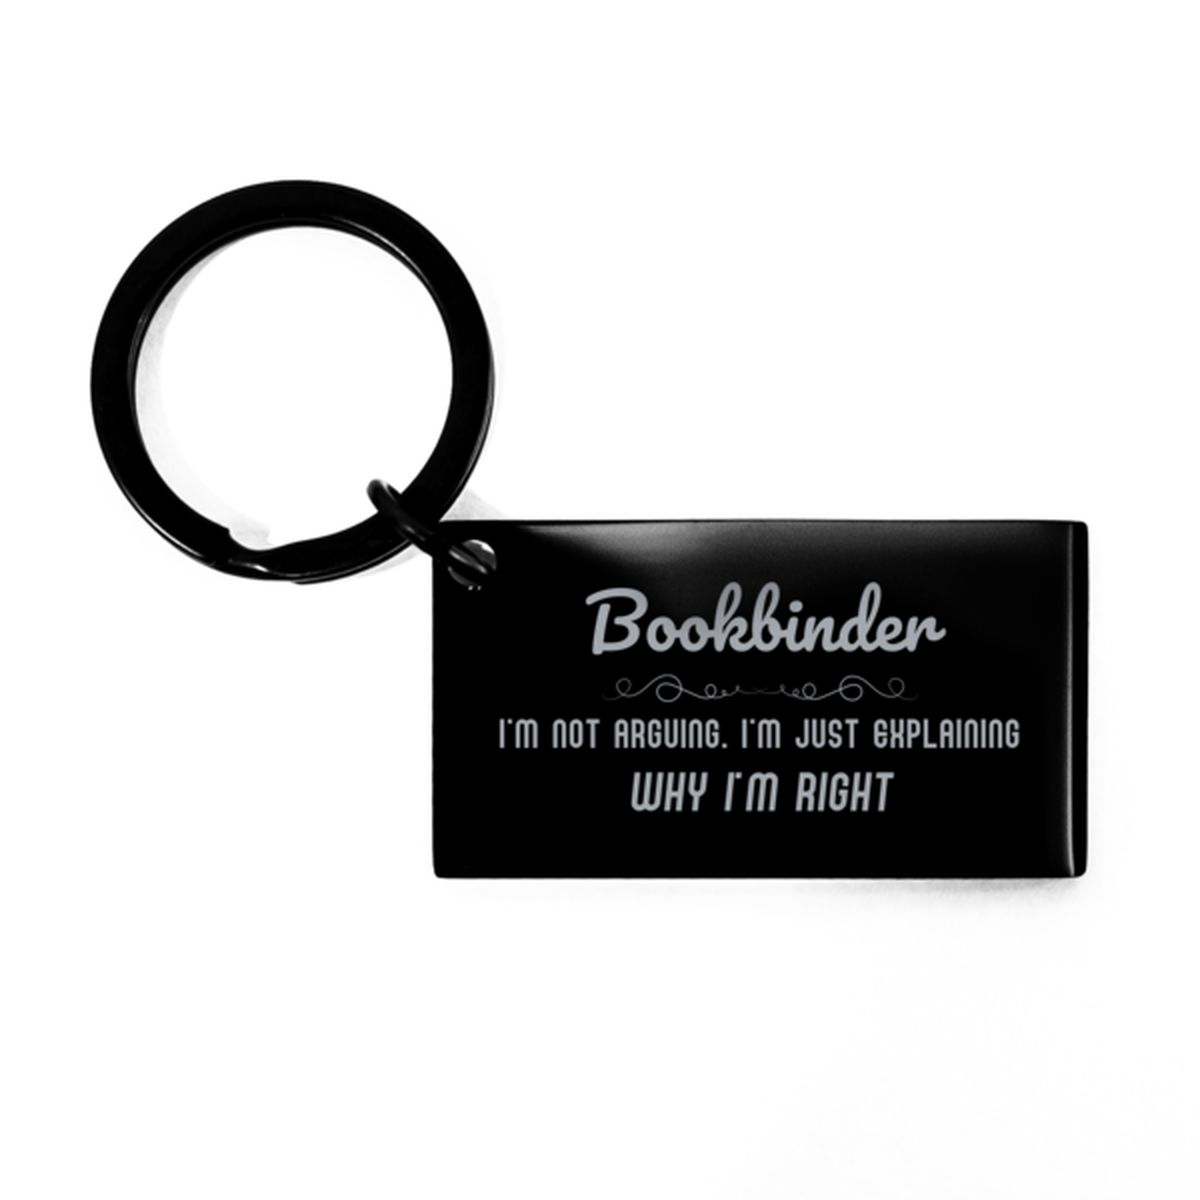 Bookbinder I'm not Arguing. I'm Just Explaining Why I'm RIGHT Keychain, Funny Saying Quote Bookbinder Gifts For Bookbinder Graduation Birthday Christmas Gifts for Men Women Coworker